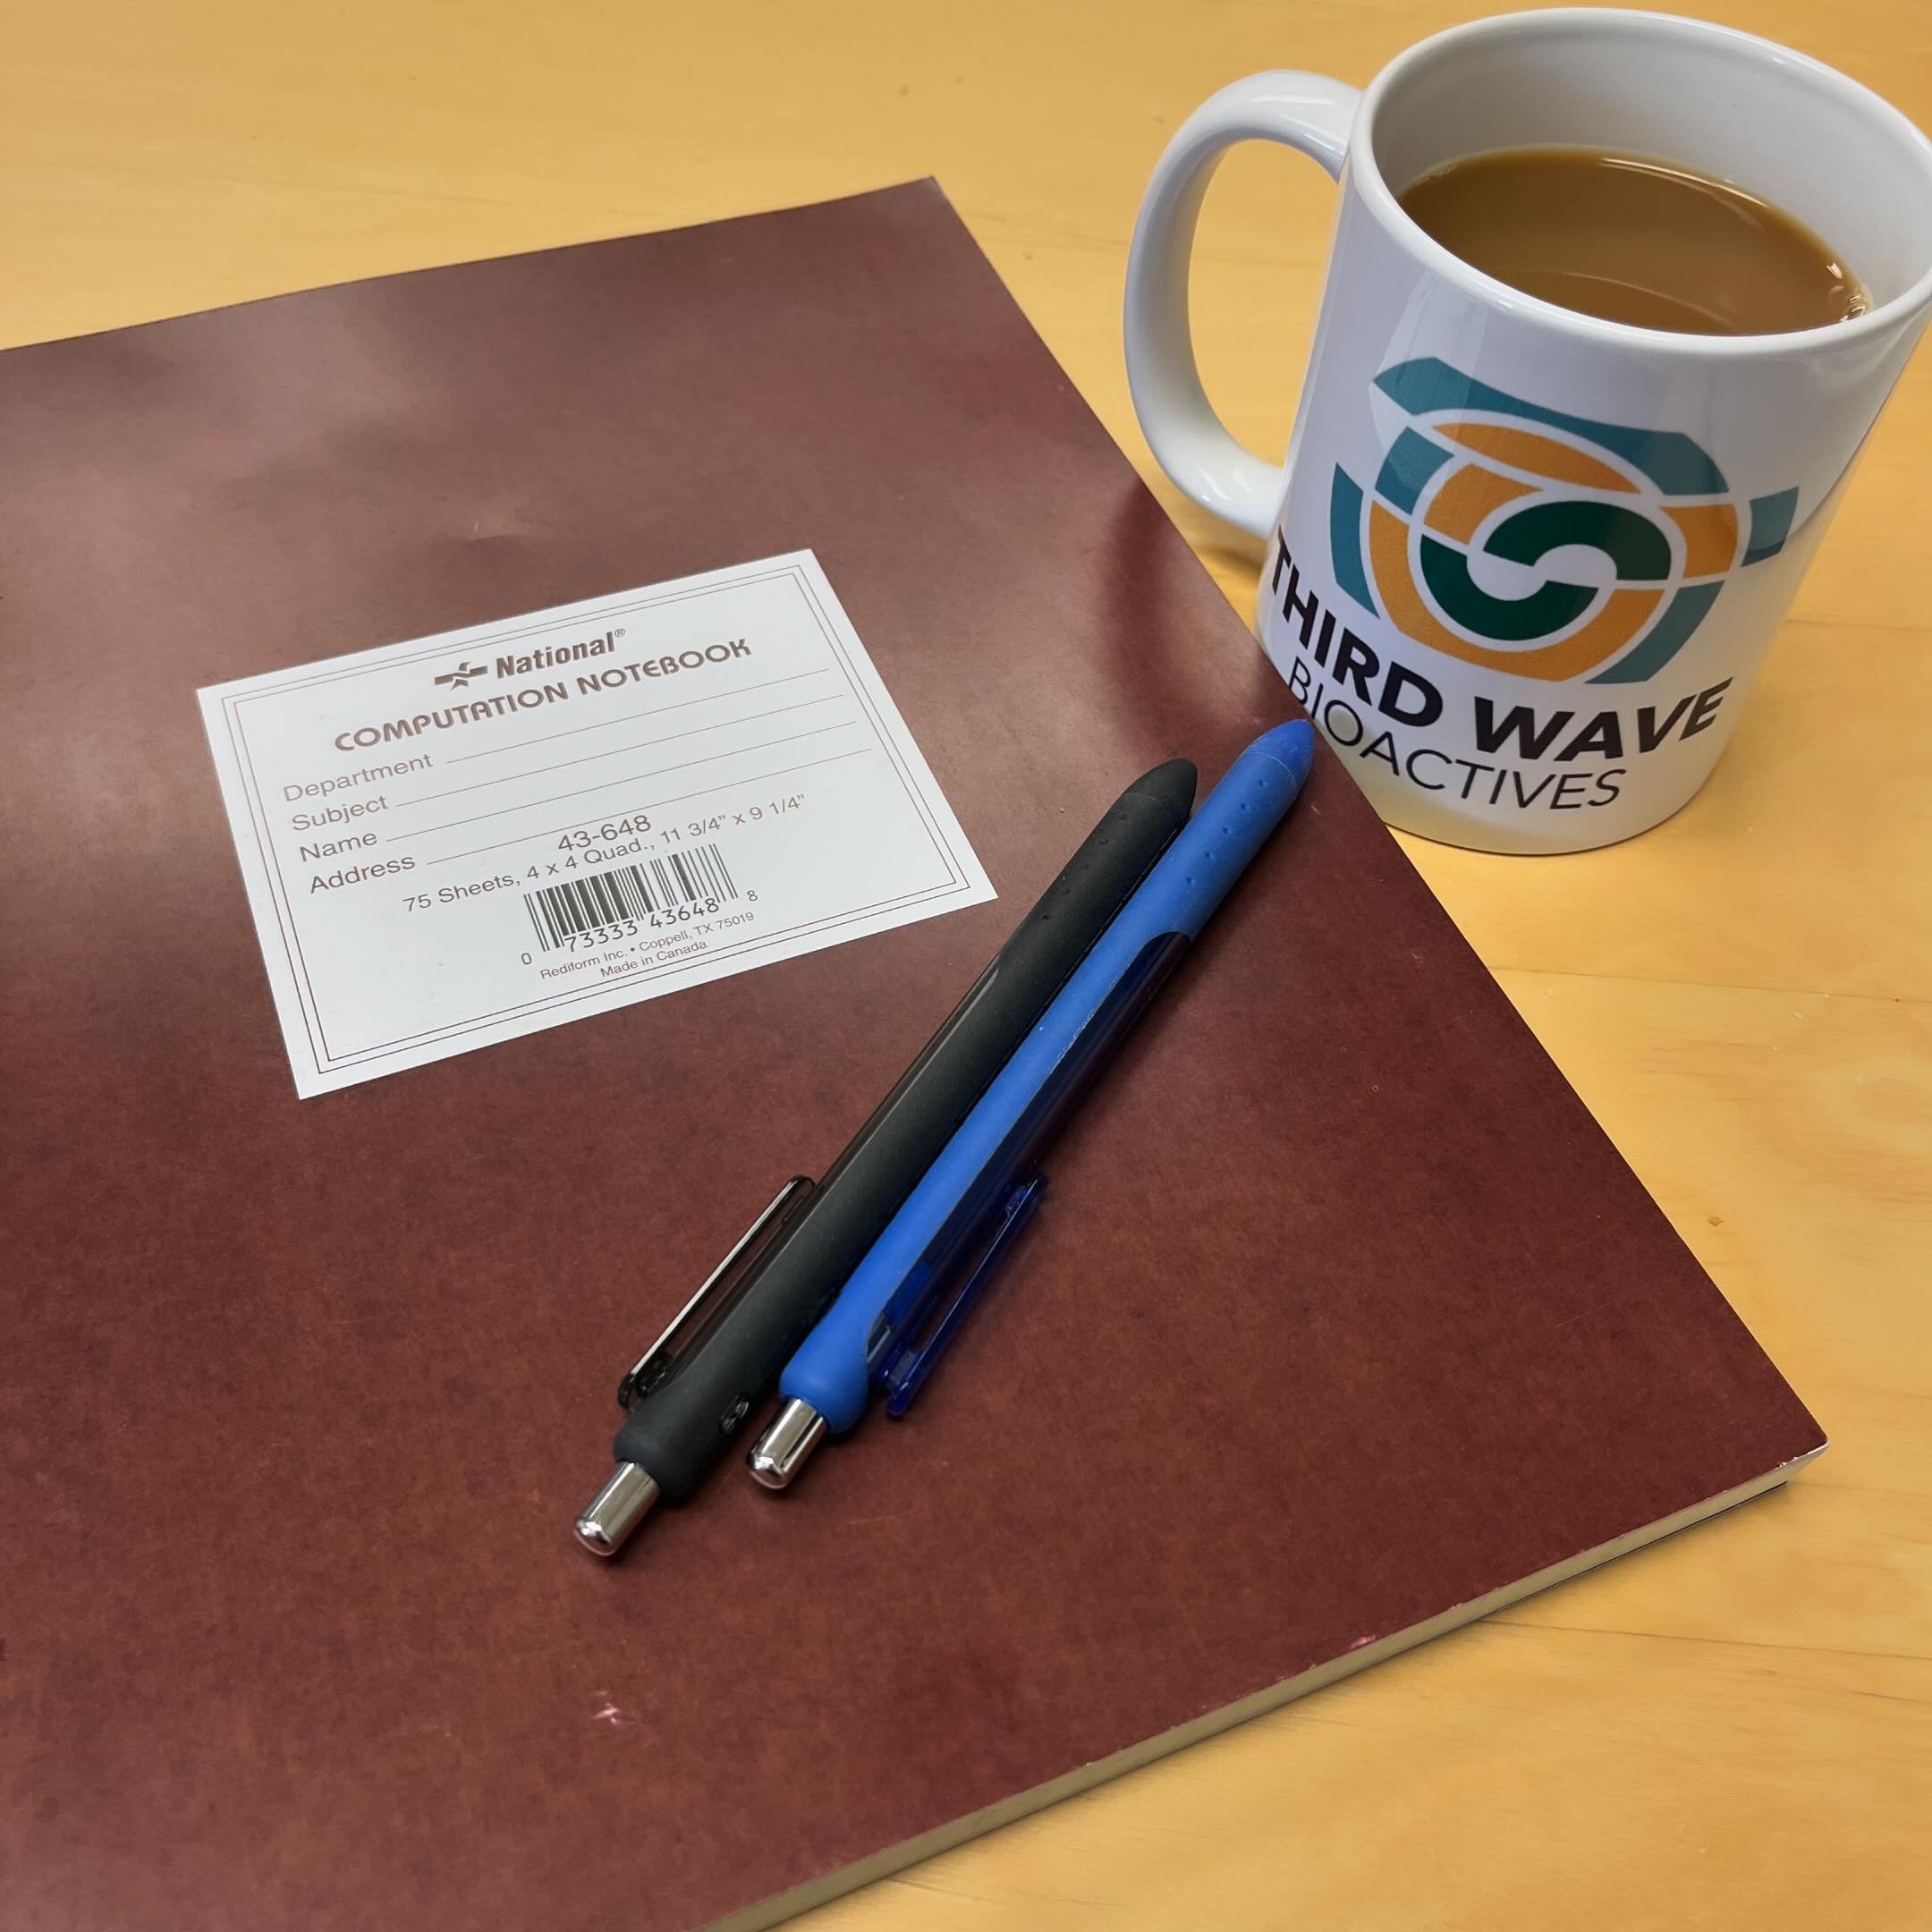 New projects mean starting a new lab notebook and a full cup of coffee. Just need to come up with a good project name. #researchlife #foodmicrobiology #sciencefriday